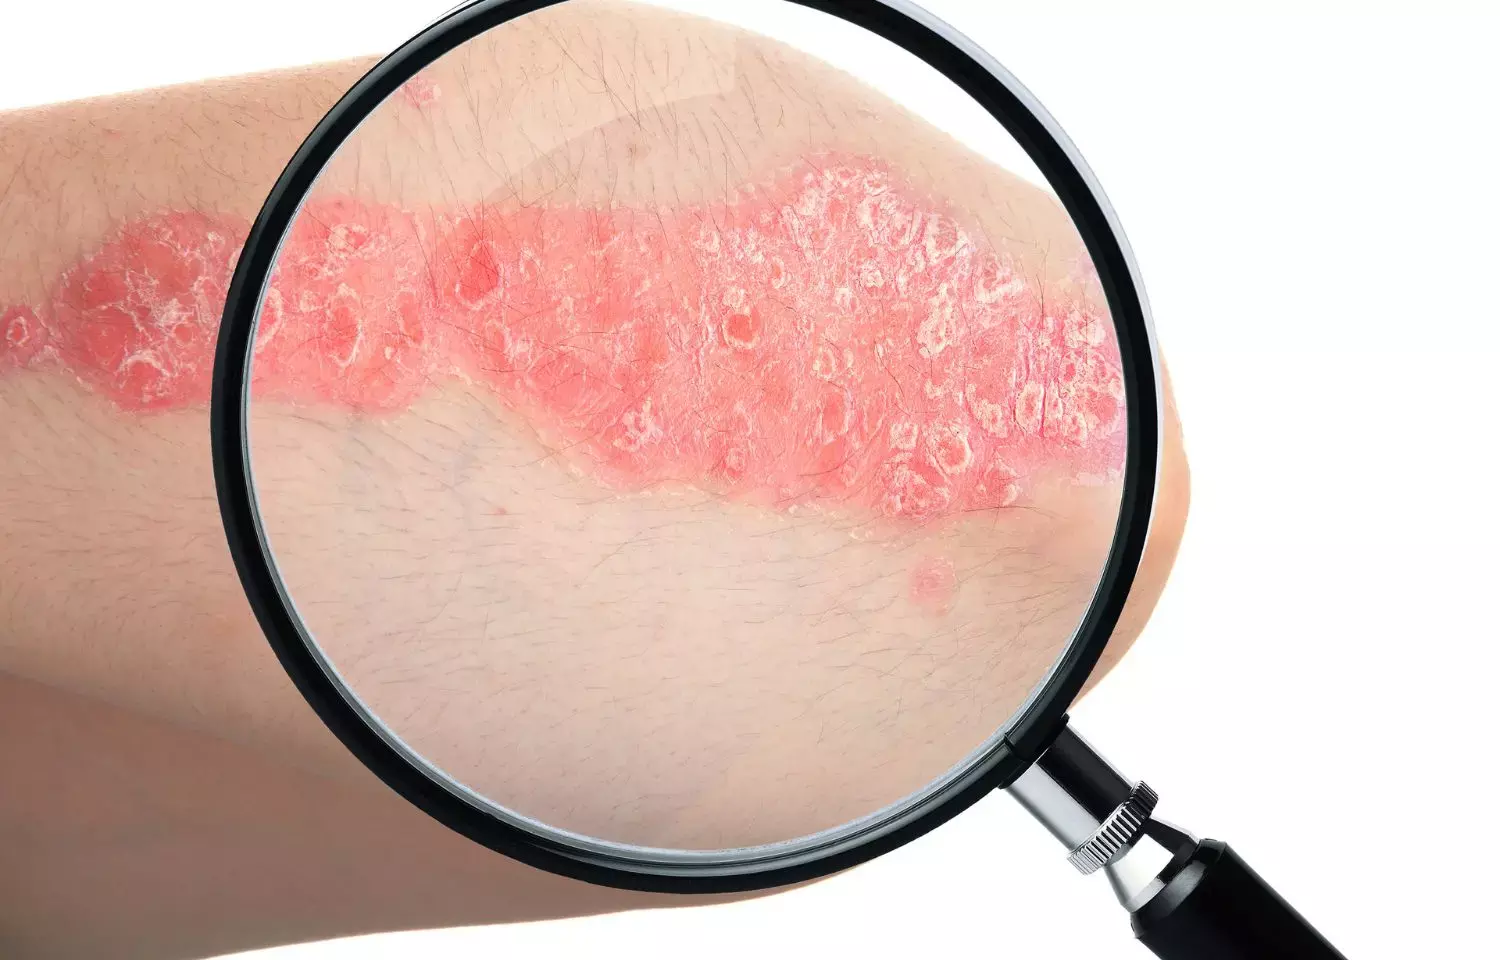 FDA approves spesolimab for treatment of generalized pustular psoriasis flares in adults